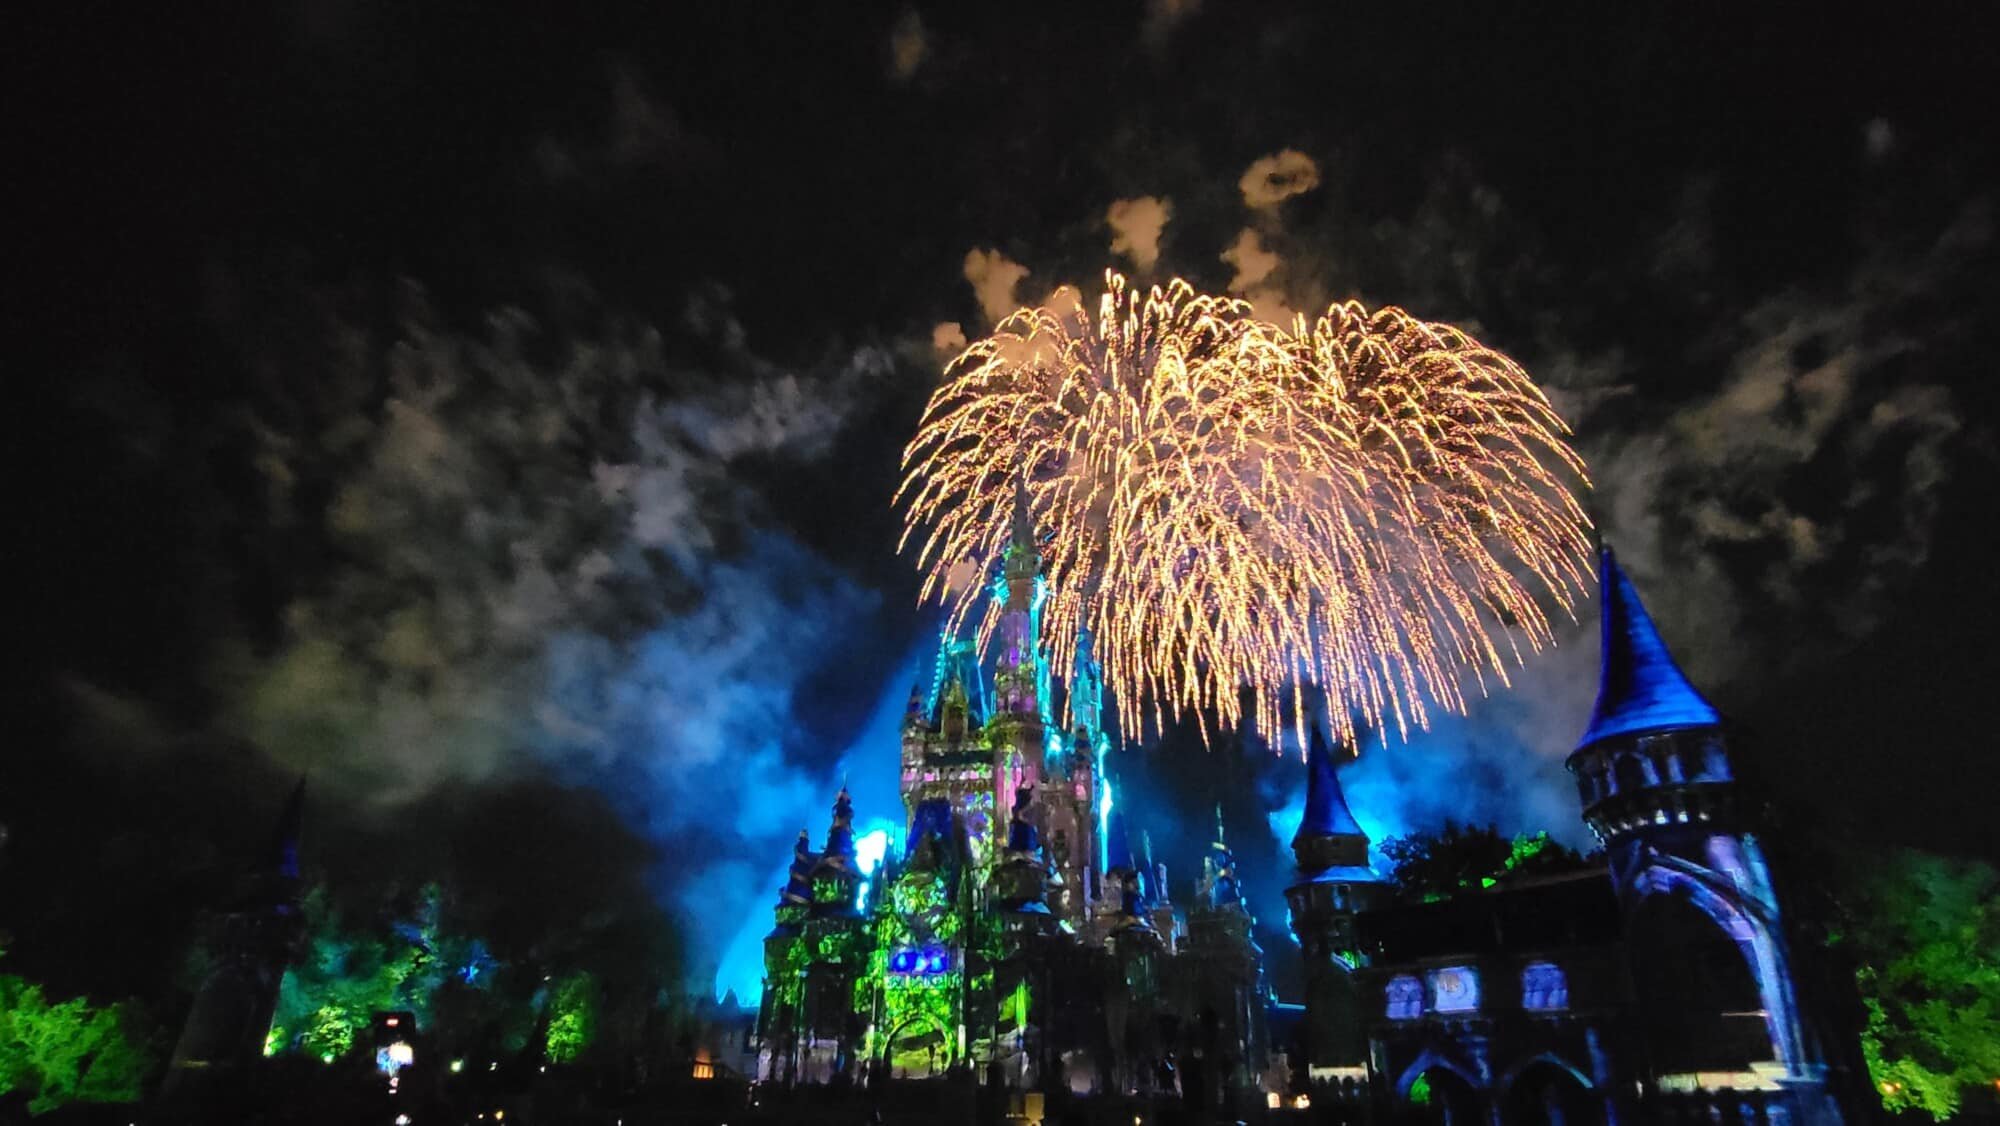 Summer 2024 'After Hours' Events Announced for Disney World Parks